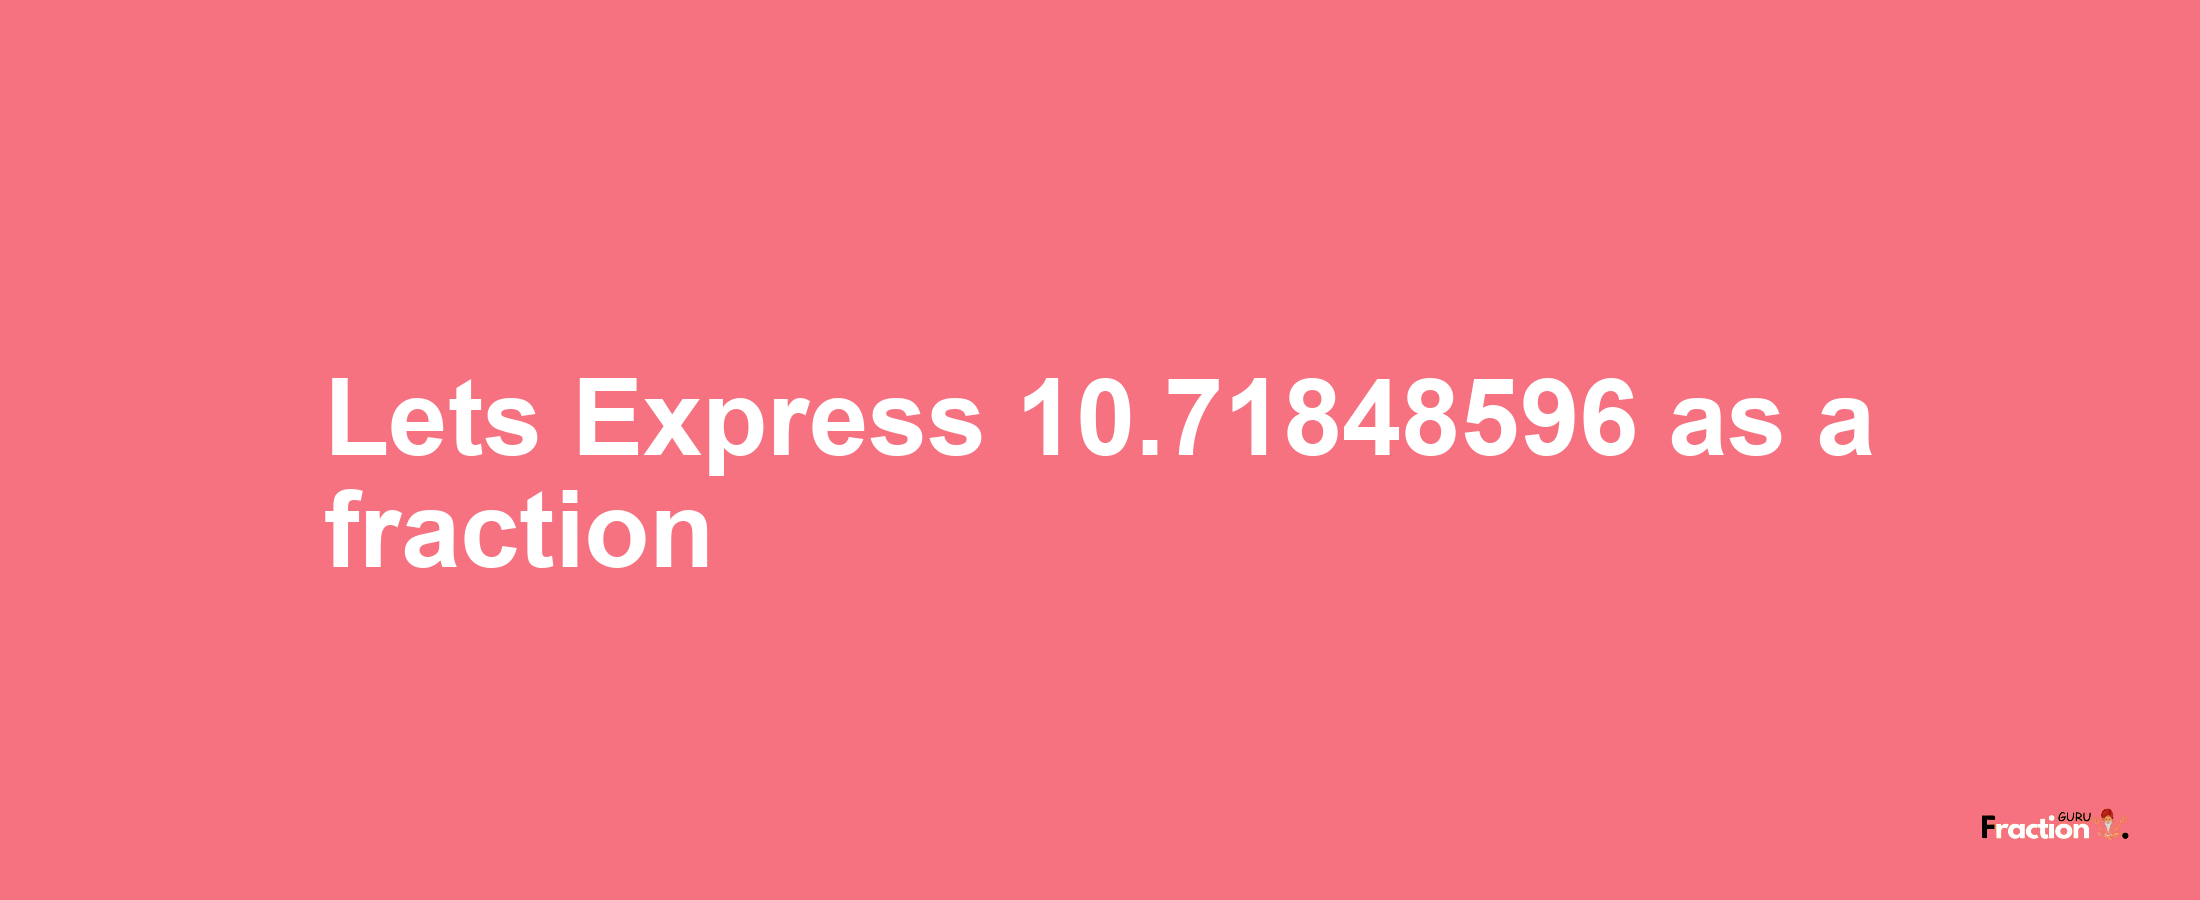 Lets Express 10.71848596 as afraction